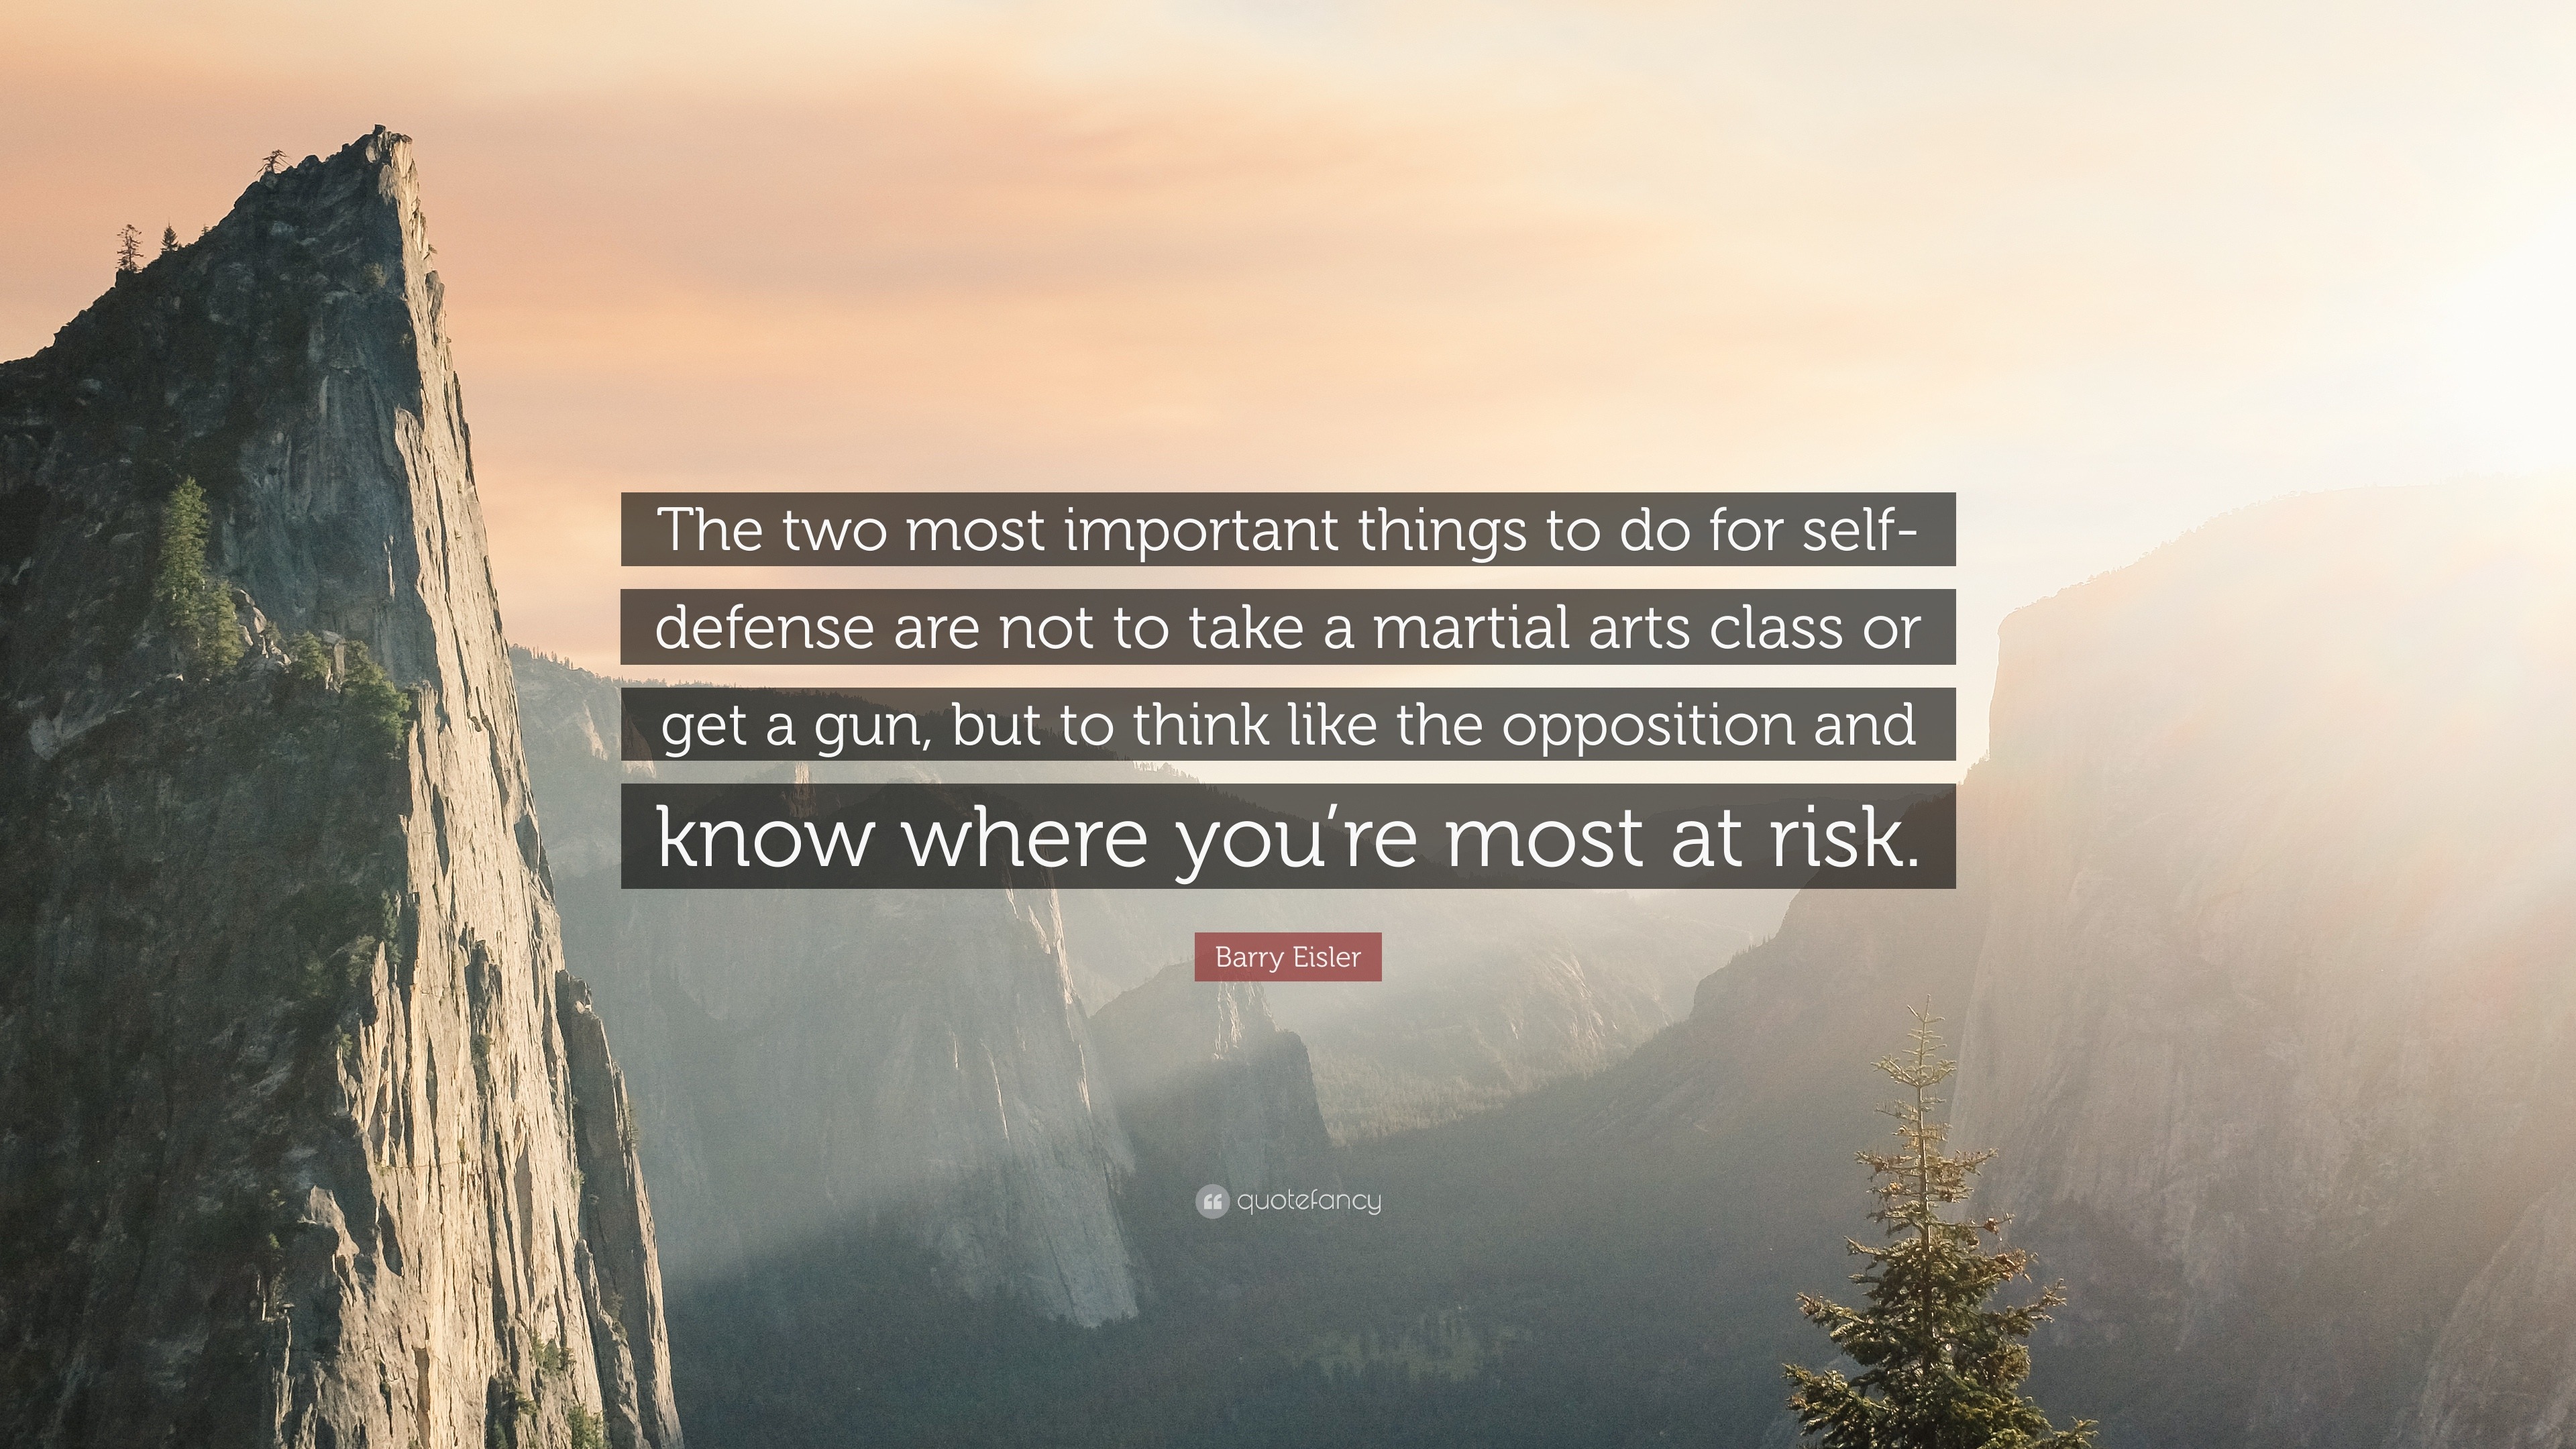 Barry Eisler Quote The Two Most Important Things To Do For Self Defense Are Not To Take A Martial Arts Class Or Get A Gun But To Think Lik